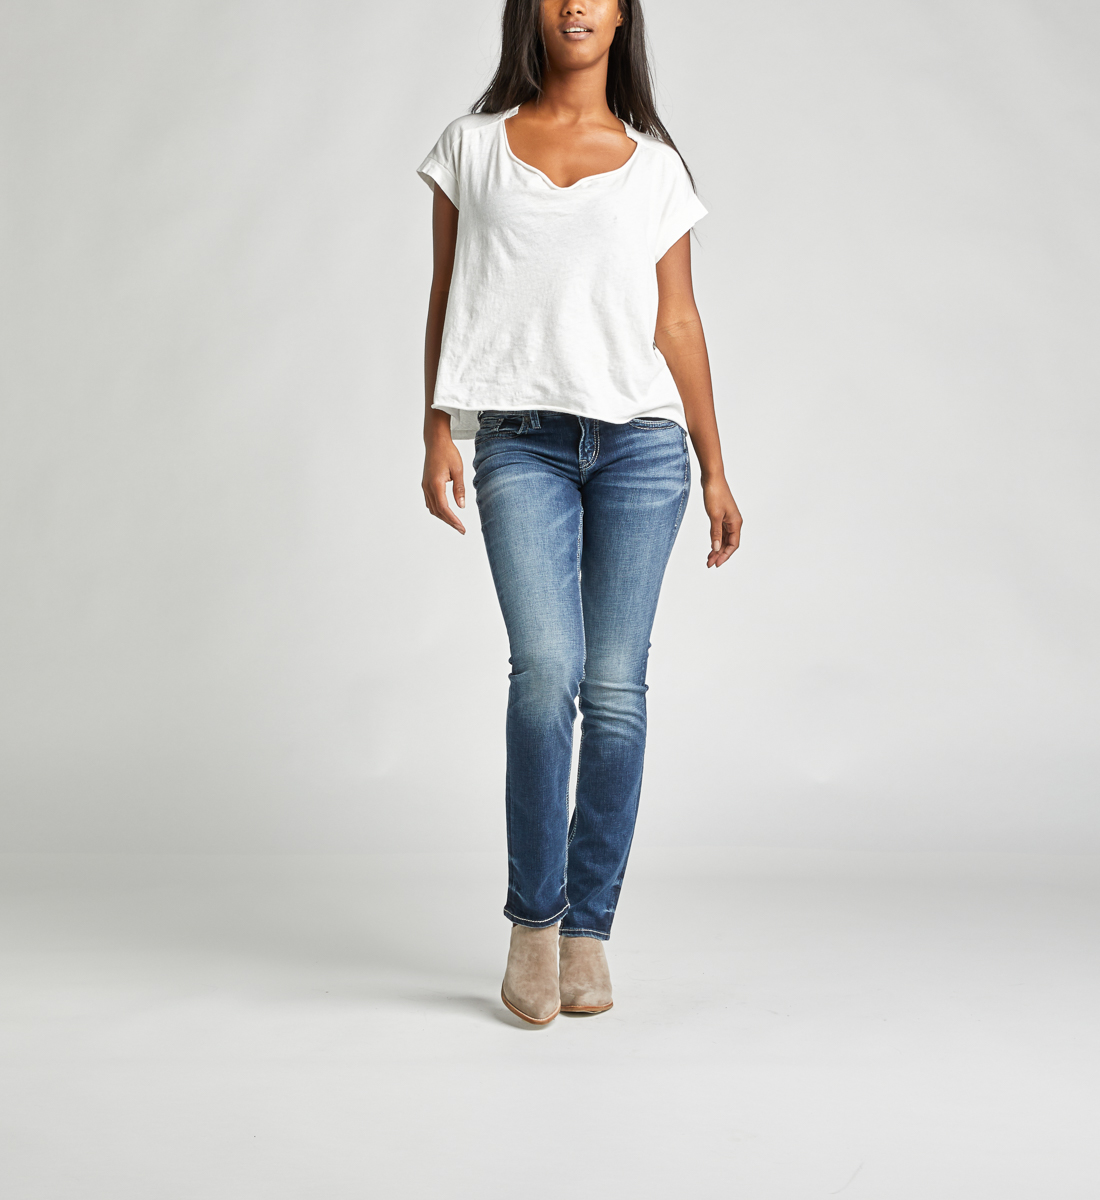 silver jeans on sale womens